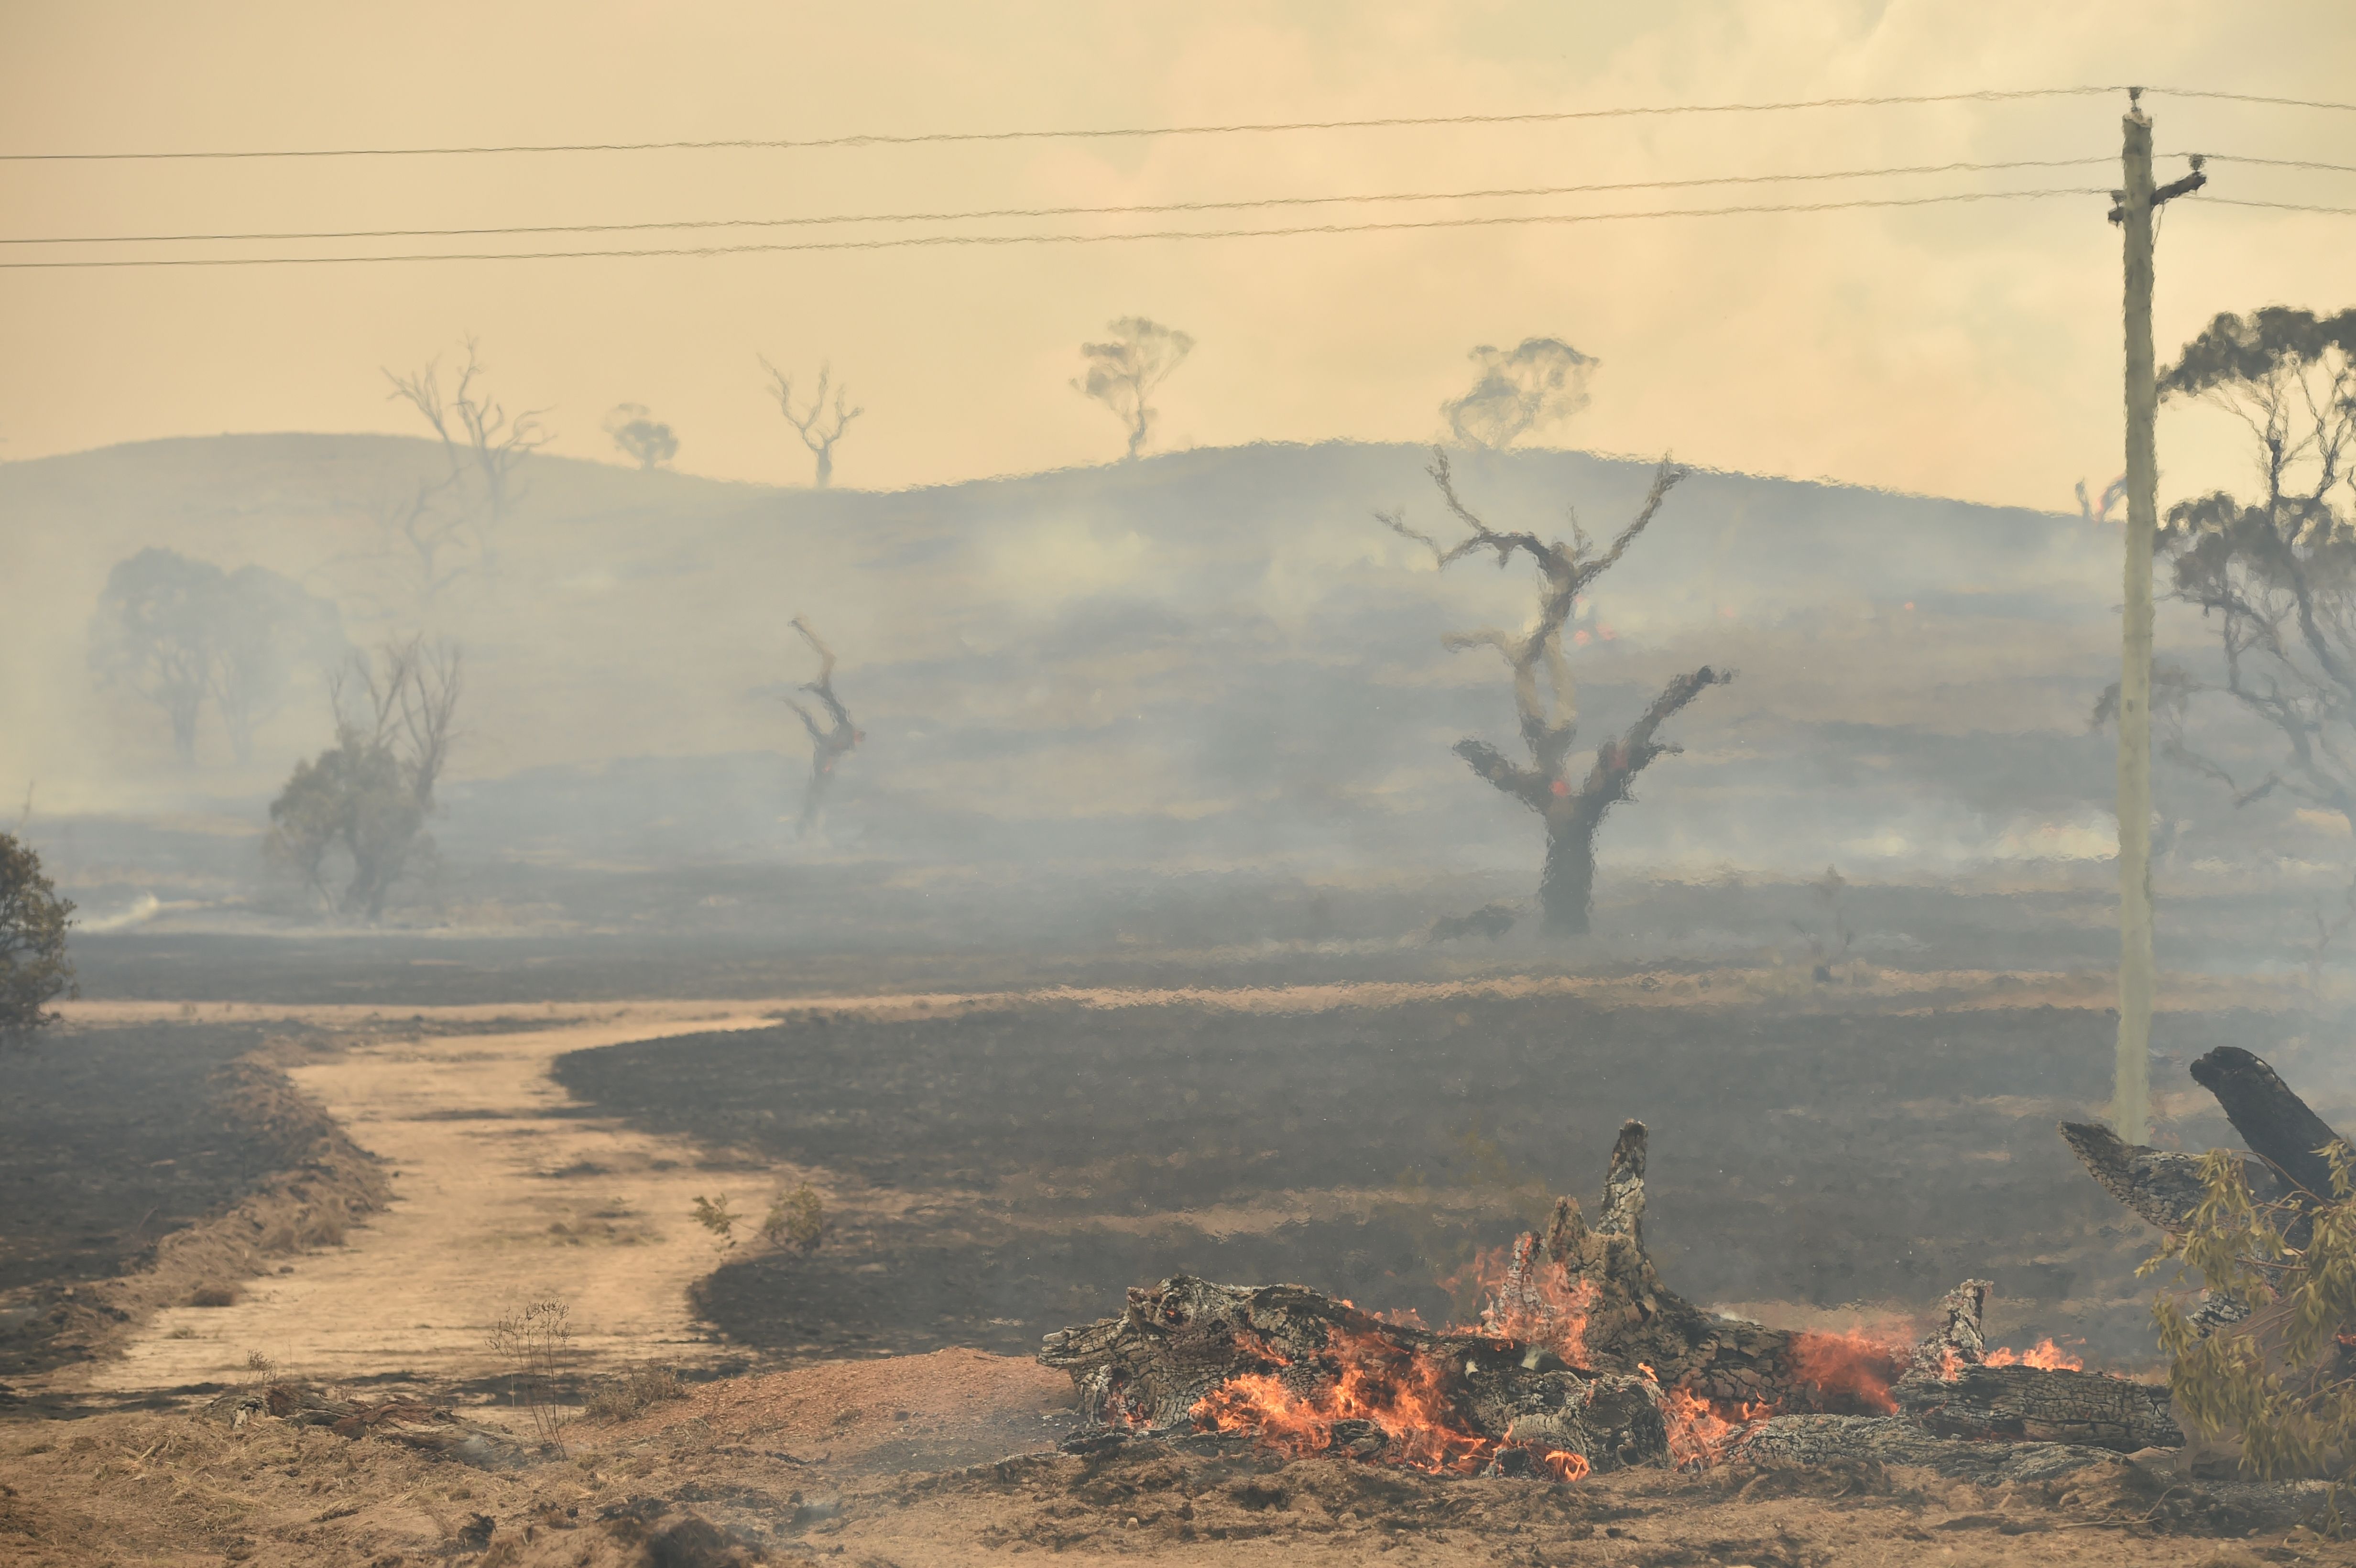 The aftermath of a bushfire near the town of Bumbalong, south of Canberra on February 2, 2020 .